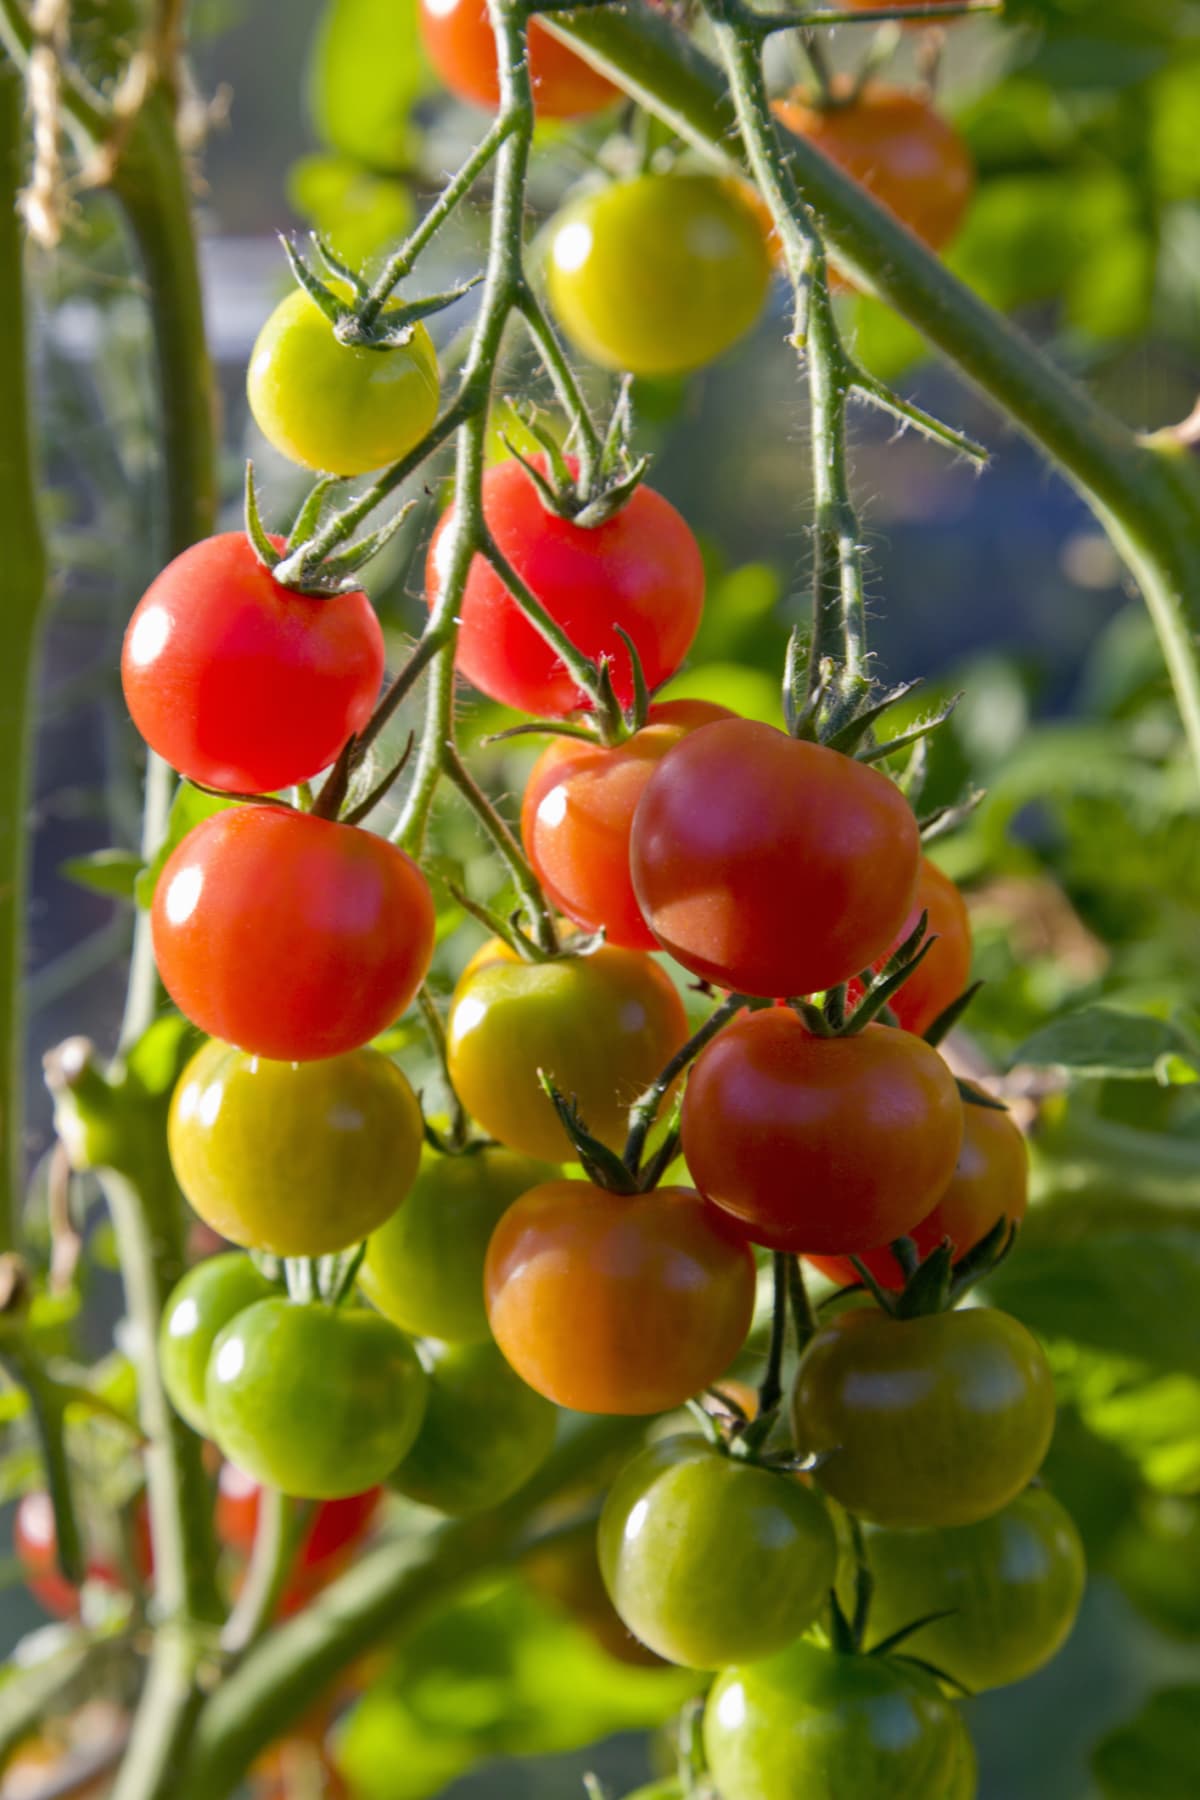 Tomatoes in various stages of ripening, hanging from the vine